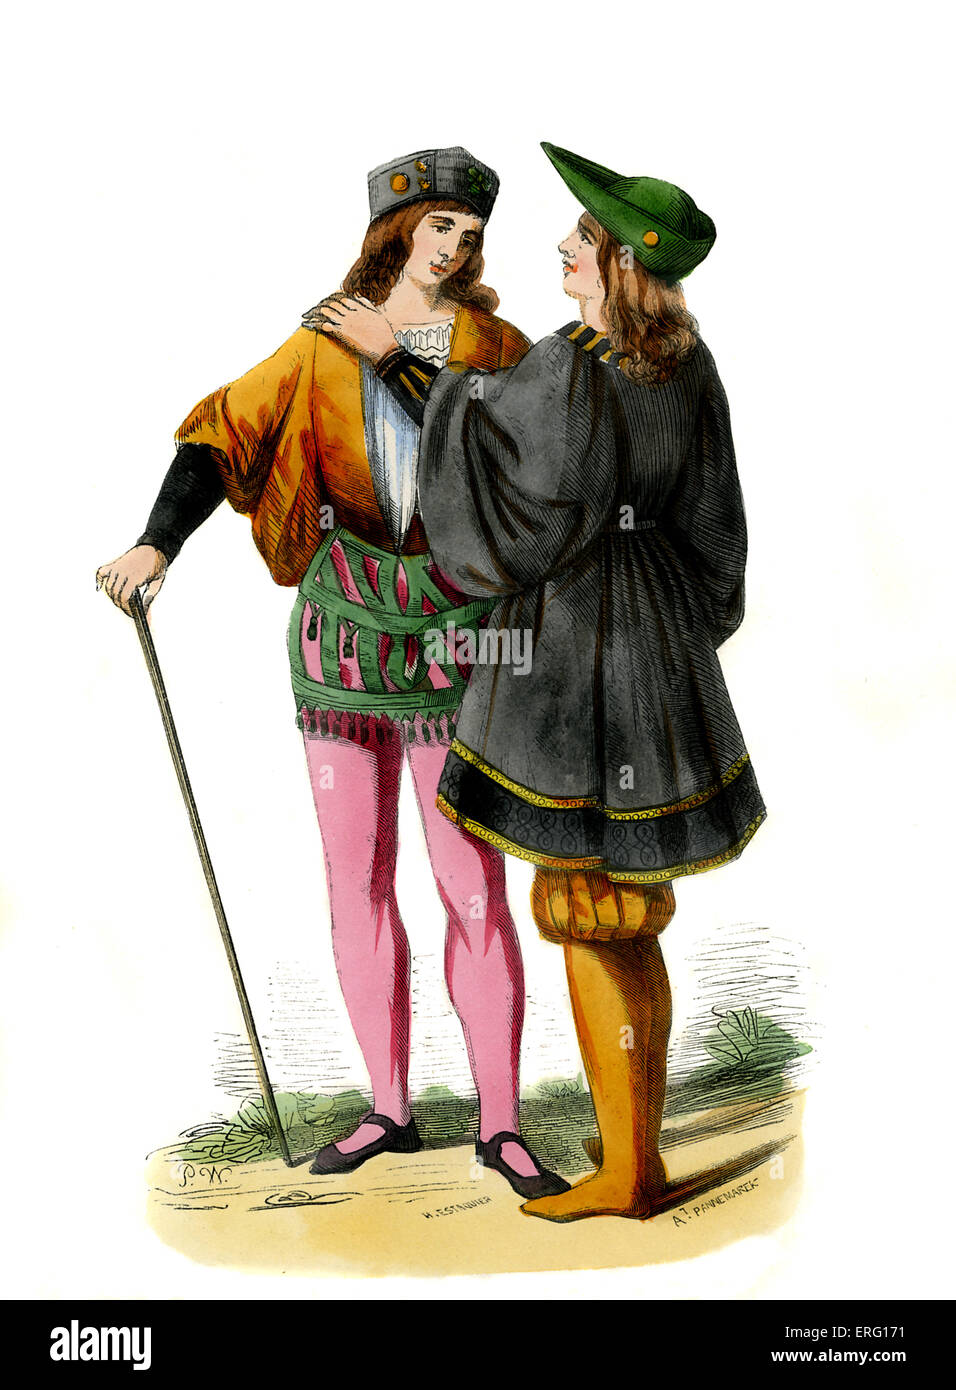 Young Italian pages - male costume of the 15th century, first page shown wearing pink leggings, mustard yellow doublet, black Stock Photo